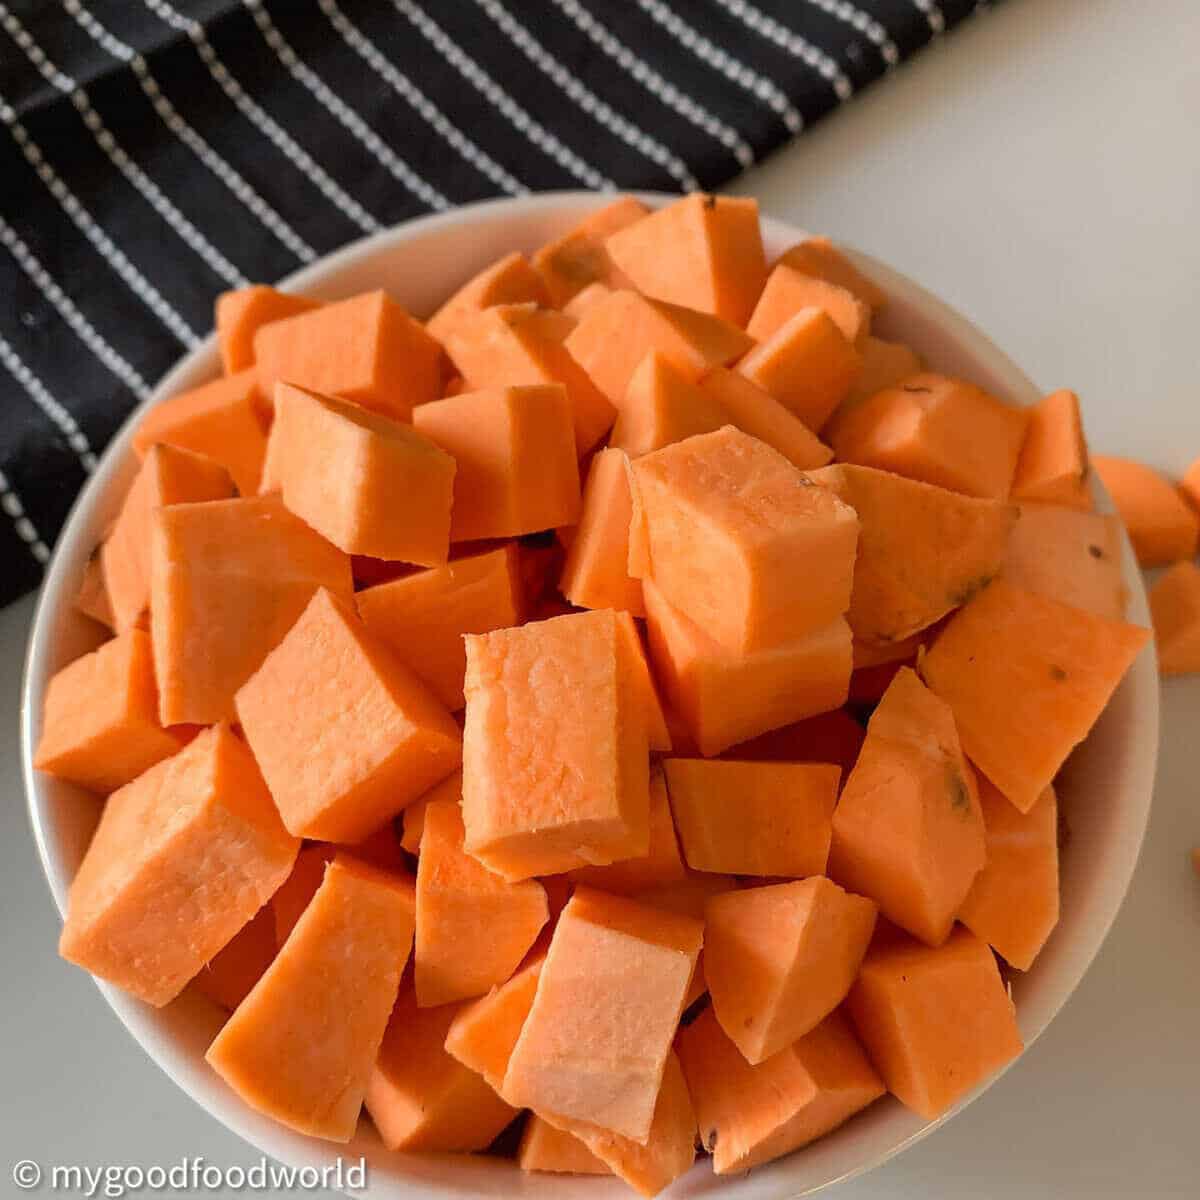 Sweet potatoe chopped and placed in a white bowl. A black cloth with white stripes is placed on the side of the bowl.